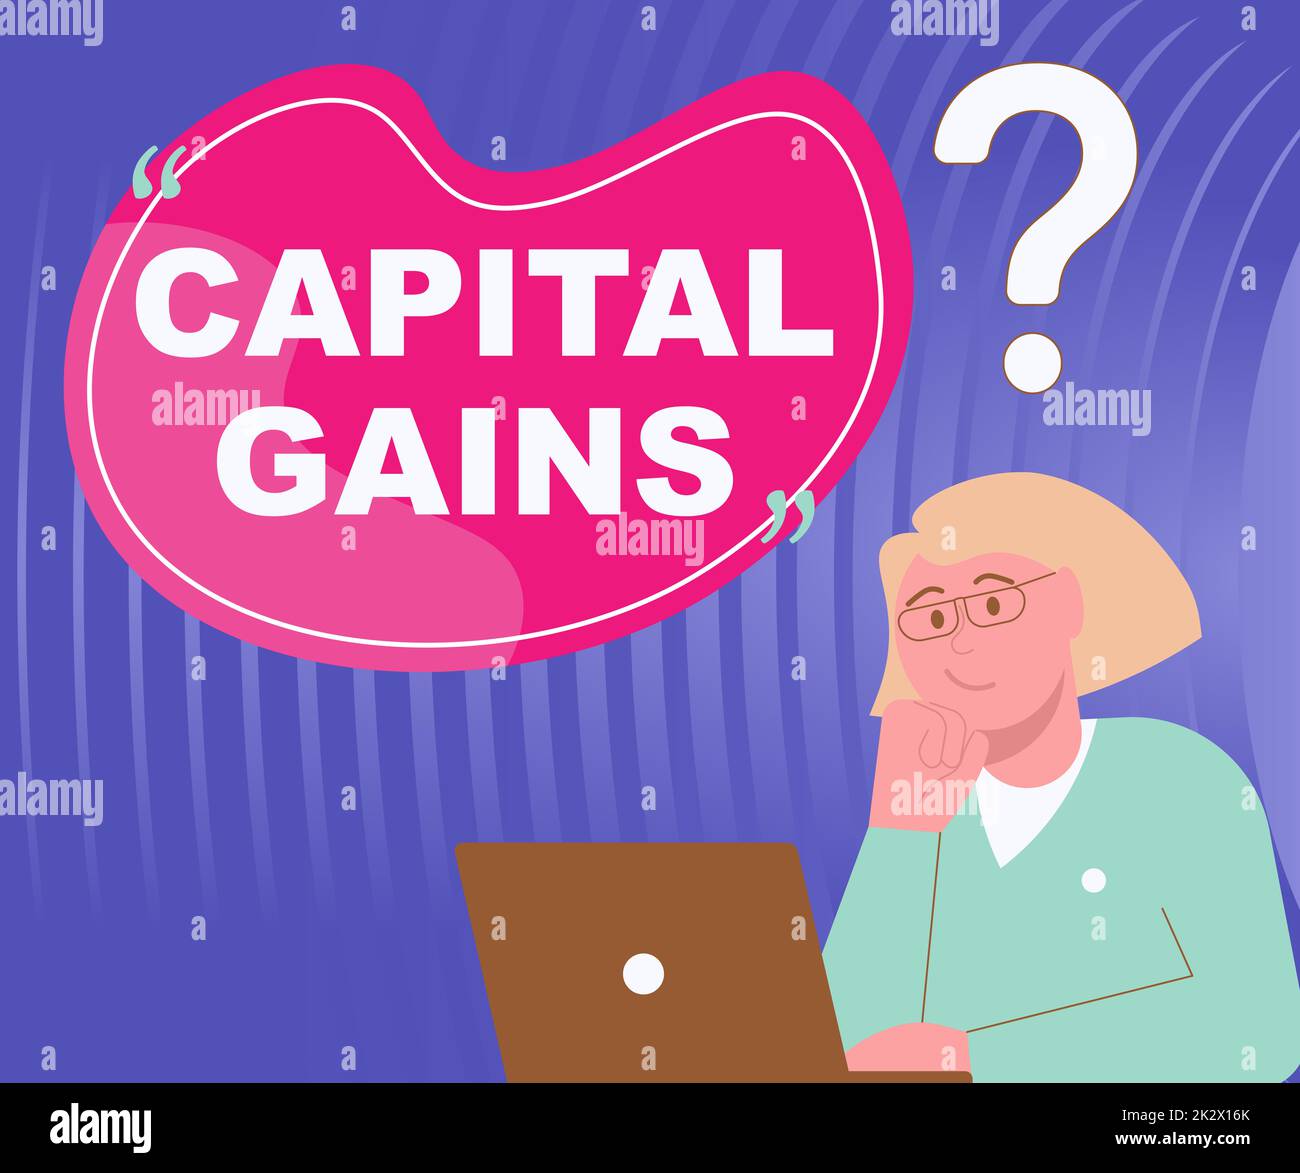 Text caption presenting Capital Gains. Word Written on Bonds Shares Stocks Profit Income Tax Investment Funds Lady Drawing Brainstorming New Solutions Surrounded With Question Marks Stock Photo